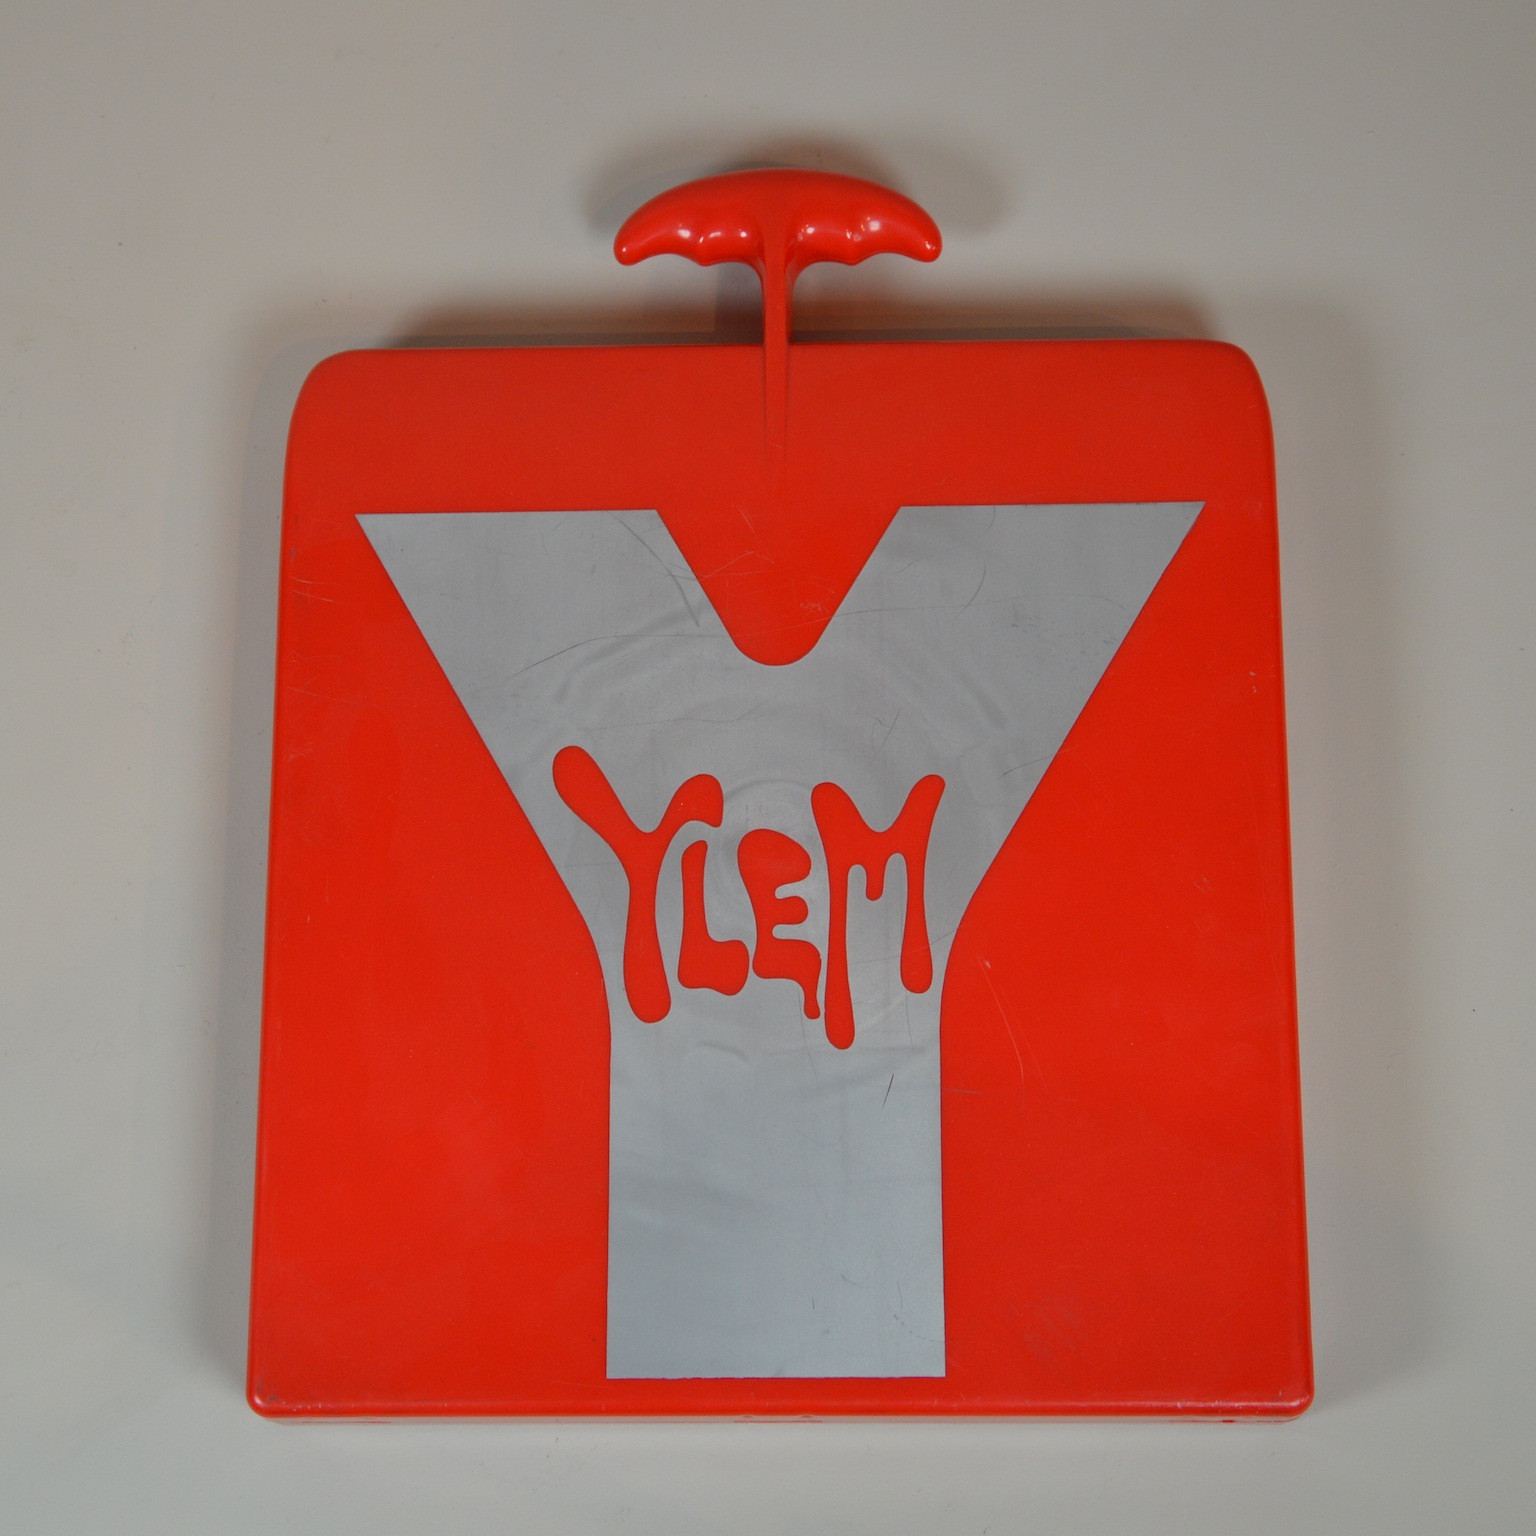 Image features a roughly square book in the form of a bright red plastic portfolio with a T-shaped handle at the top. The cover is embellished with a large silver-toned letter Y with the word YLEM superimposed in red. Please scroll down to read the blog post about this object.